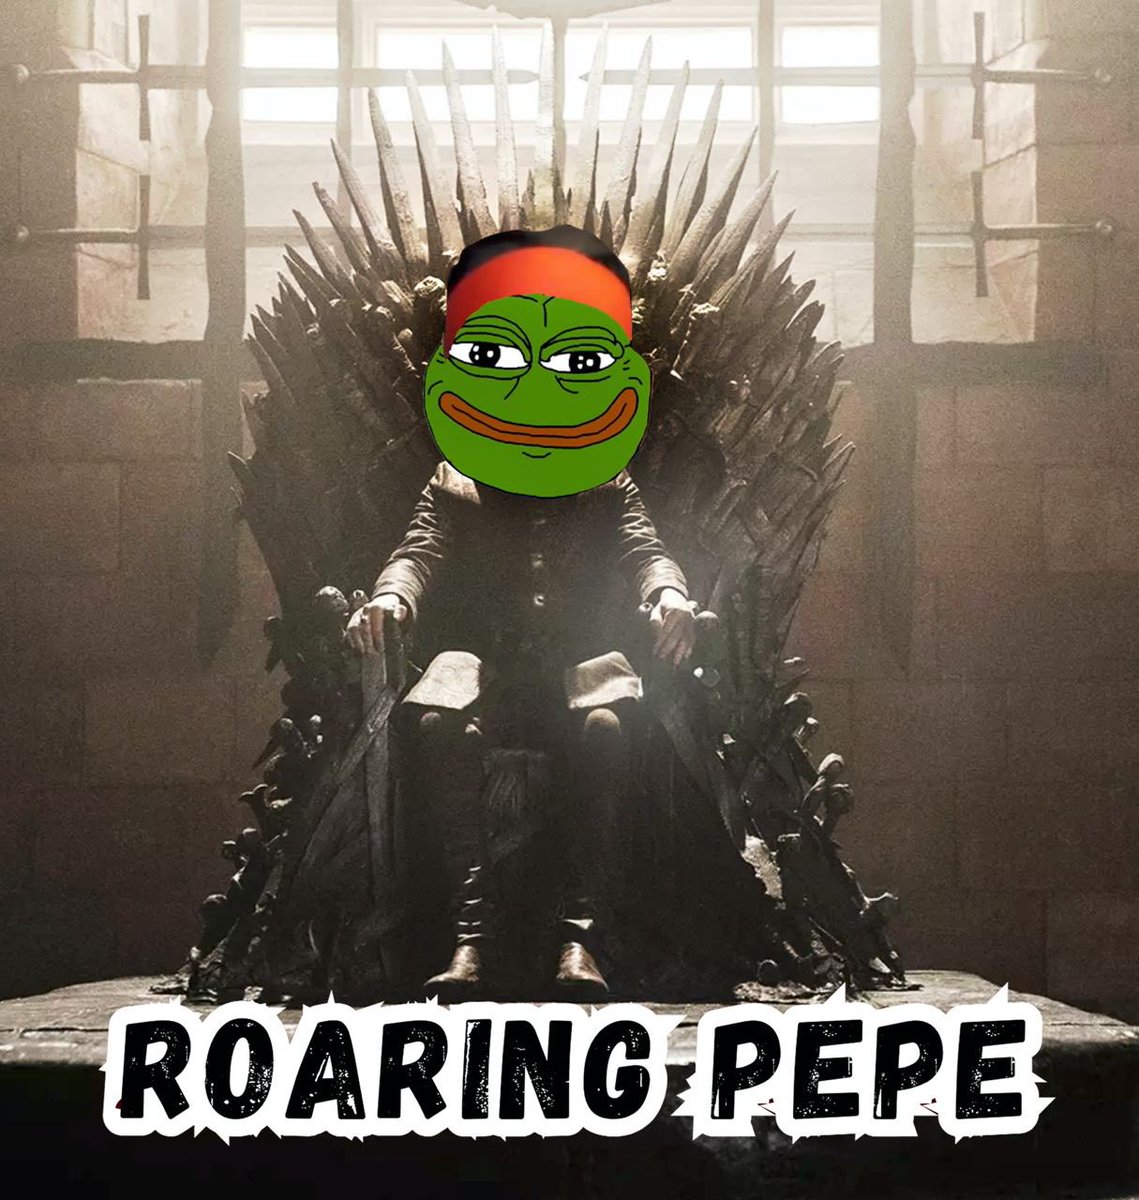 @1000xgirl Most definitely $RPEPE The pump hasn’t even started Diamond handed mfers all over this community. @roaringpepe will melt faces